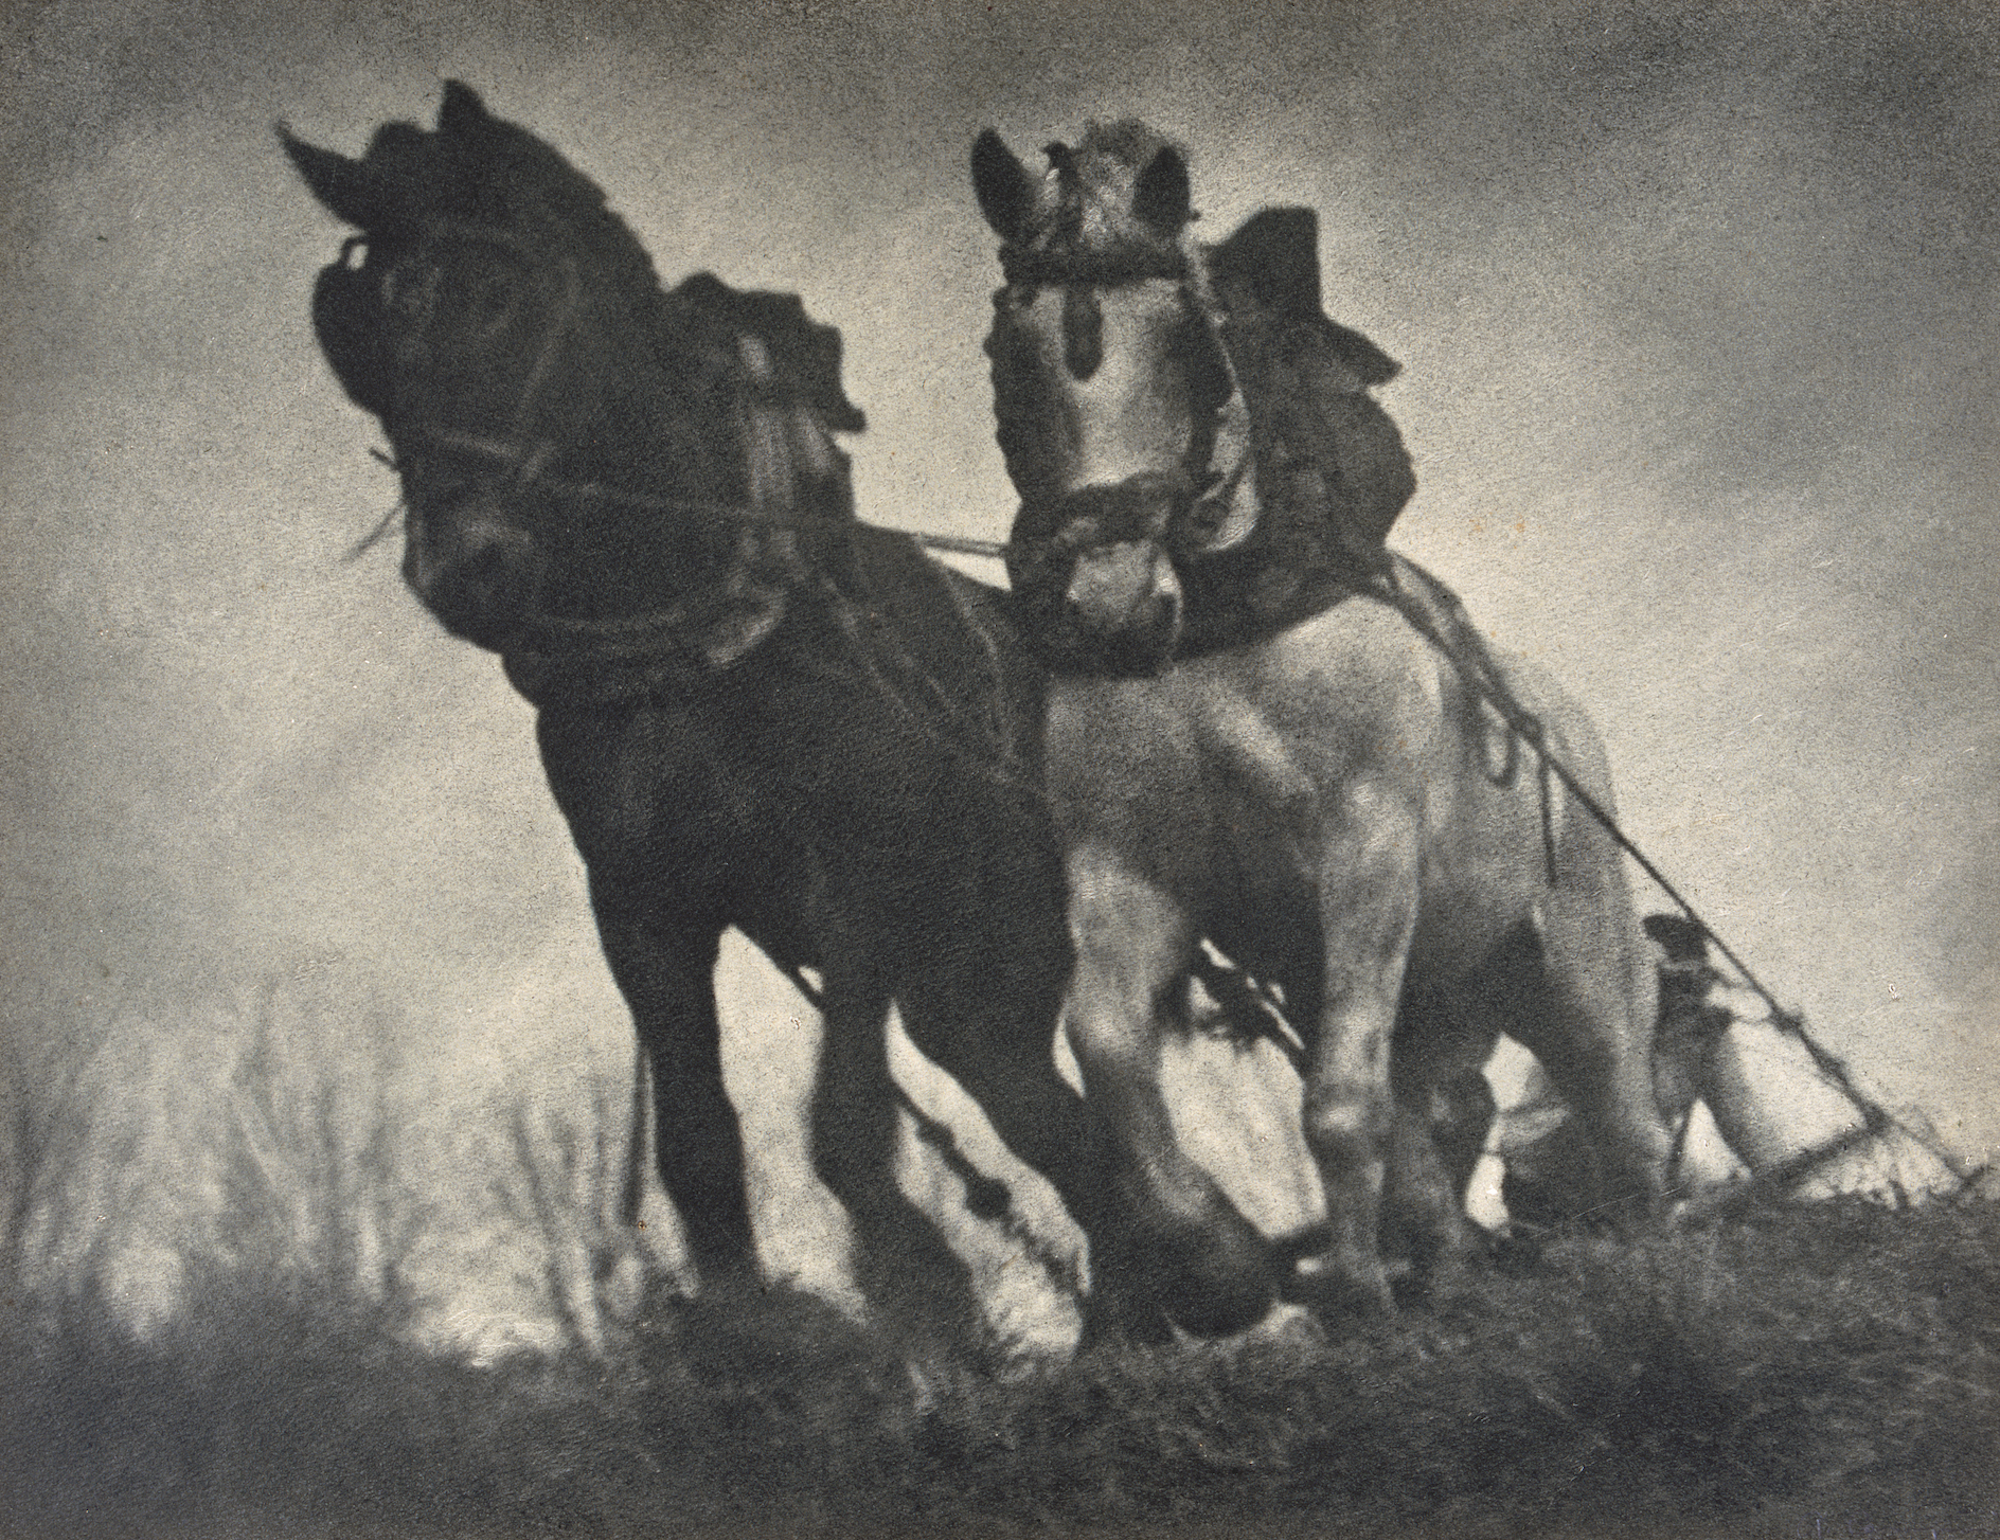 Tracción de sangre ("Traction of blood" or "Taking of blood"), 1933 © Arxiu Campañà. Antoni Campañà's most awarded pictorialist bromolithograph at international art photography shows in the early 1930s.